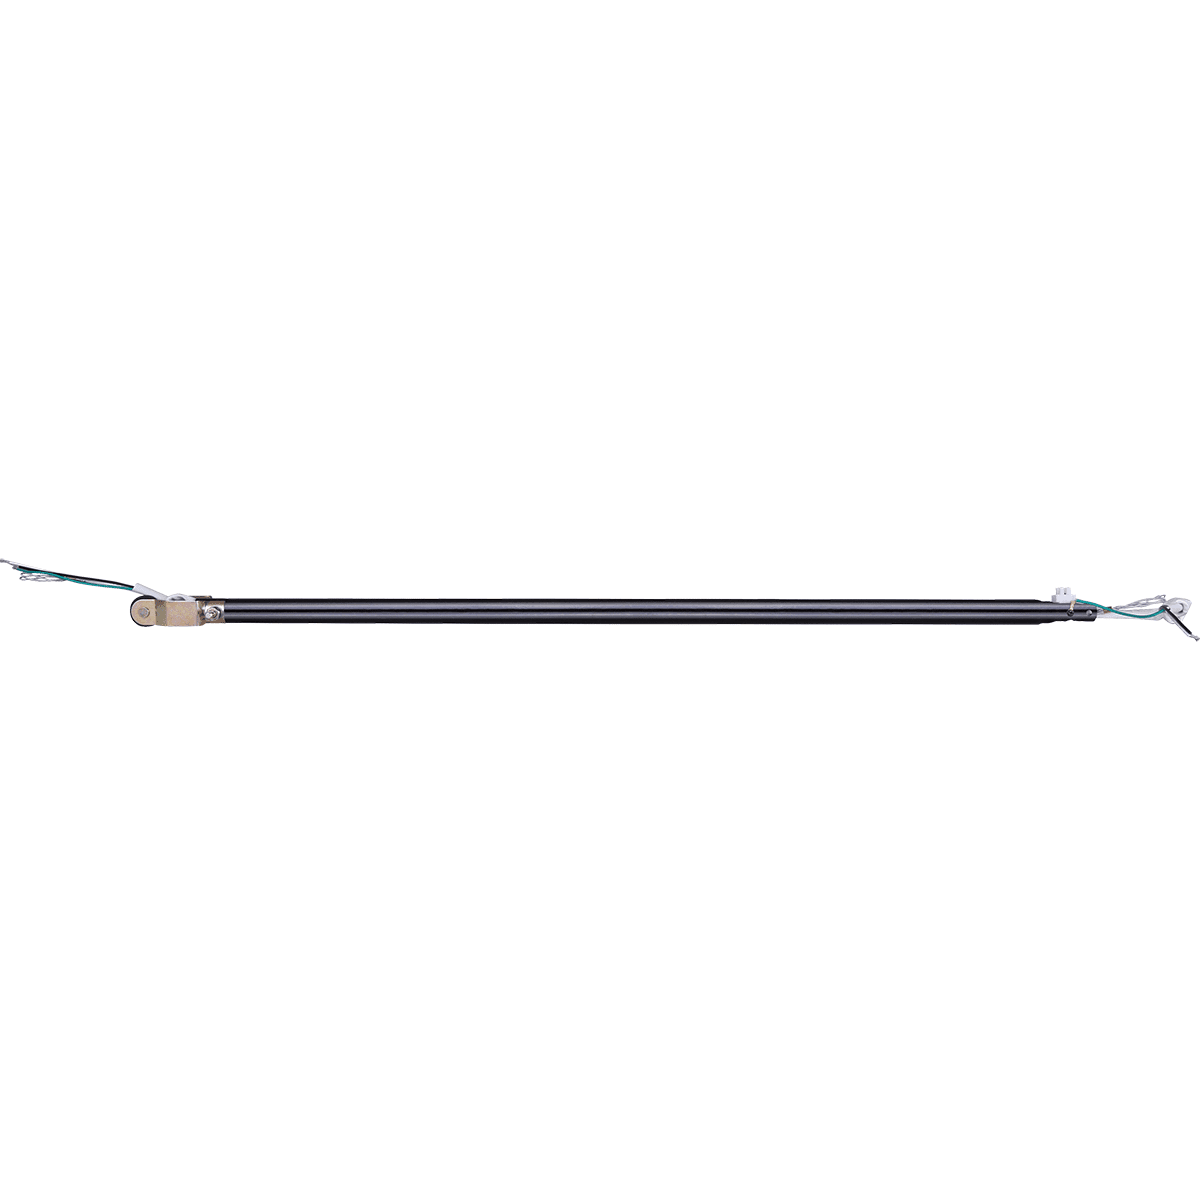 Canarm DCR3610 36-inch Downrod for High Performance CP Series Industrial Fans - Black